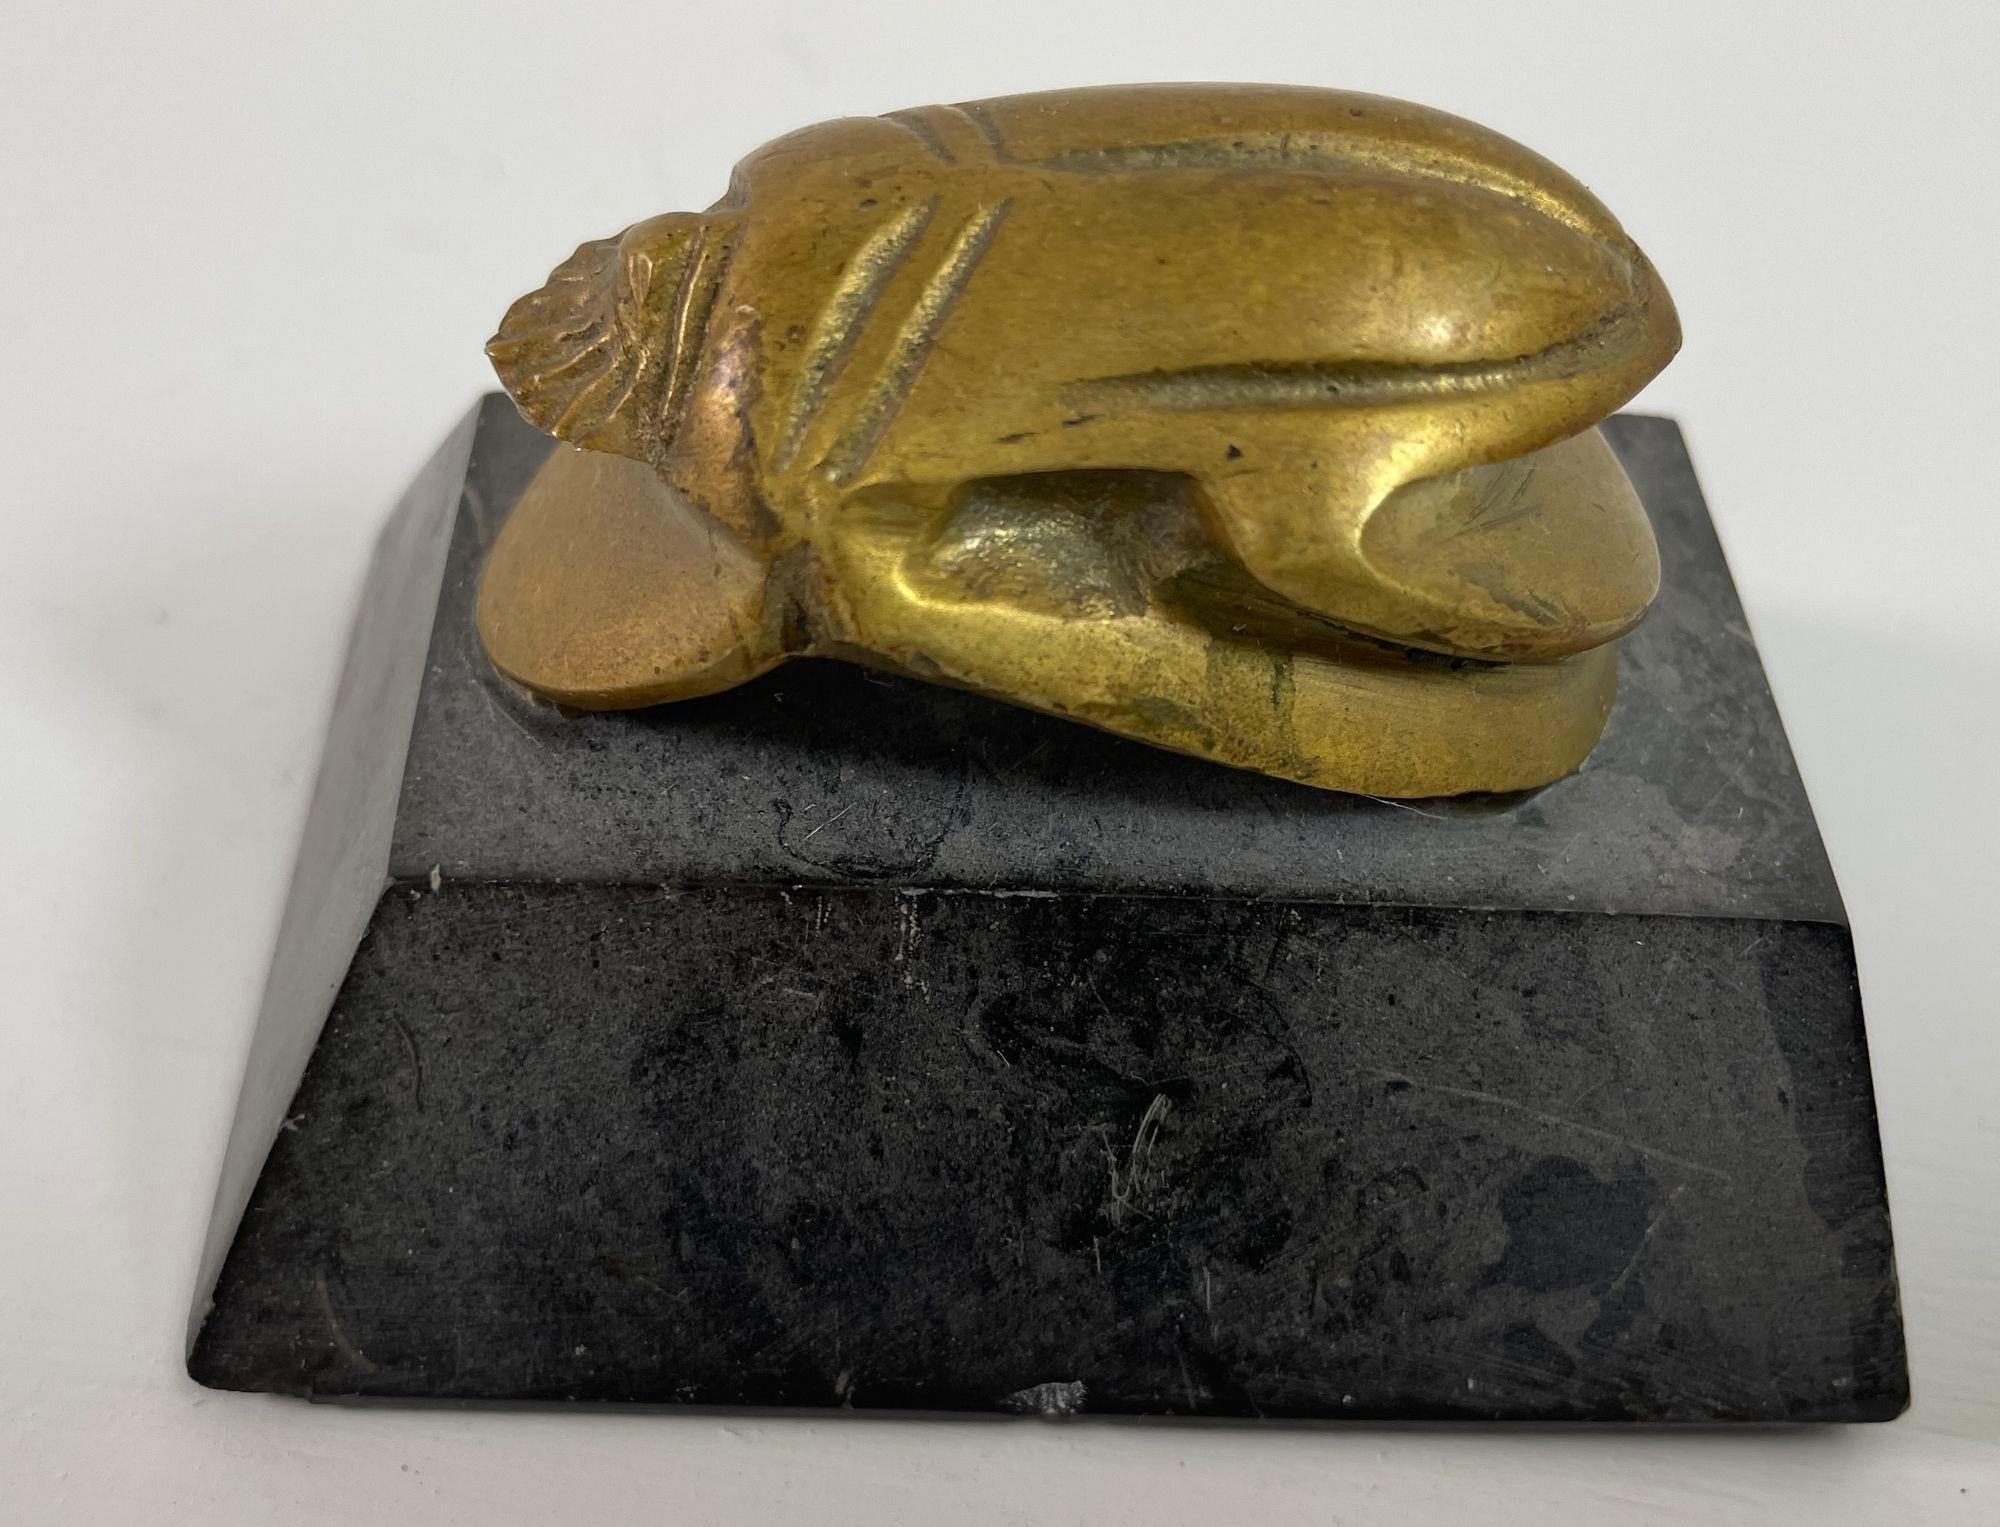 Egyptian Scarab Brass Beetle Figurine on stone stand after the Egyptian Museum antiquities.A unique and beautiful addition to any Egyptian Art Deco collection.
This Vintage solid cast brass Egyptian scarab beetle sculpture figurine on a black stone